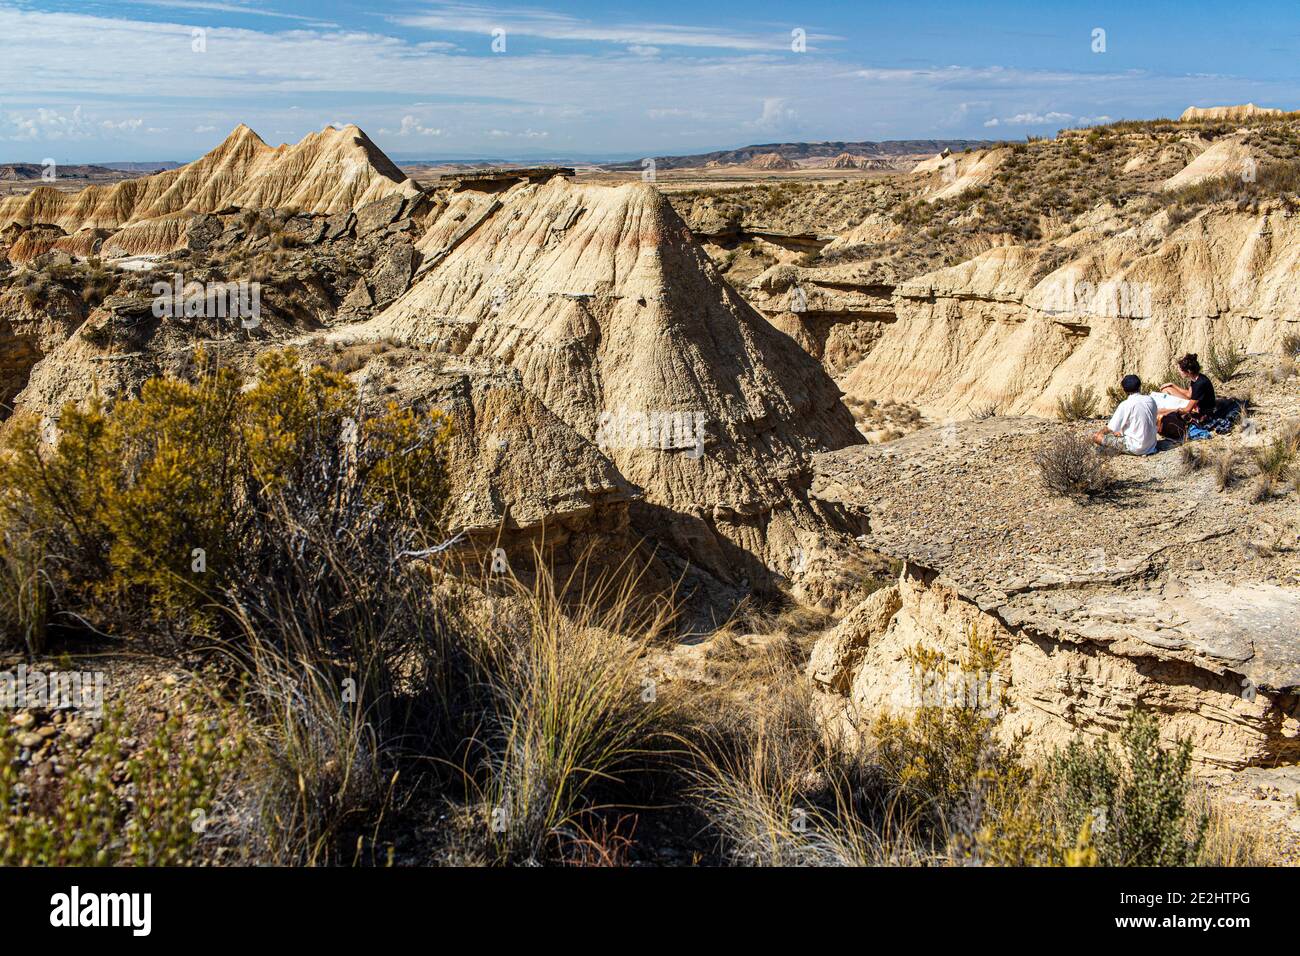 Spain: landscape, semi-desert natural region of the Bardenas Reales, Navarre. Couple of tourists facing the landscape marked by erosion. Stock Photo